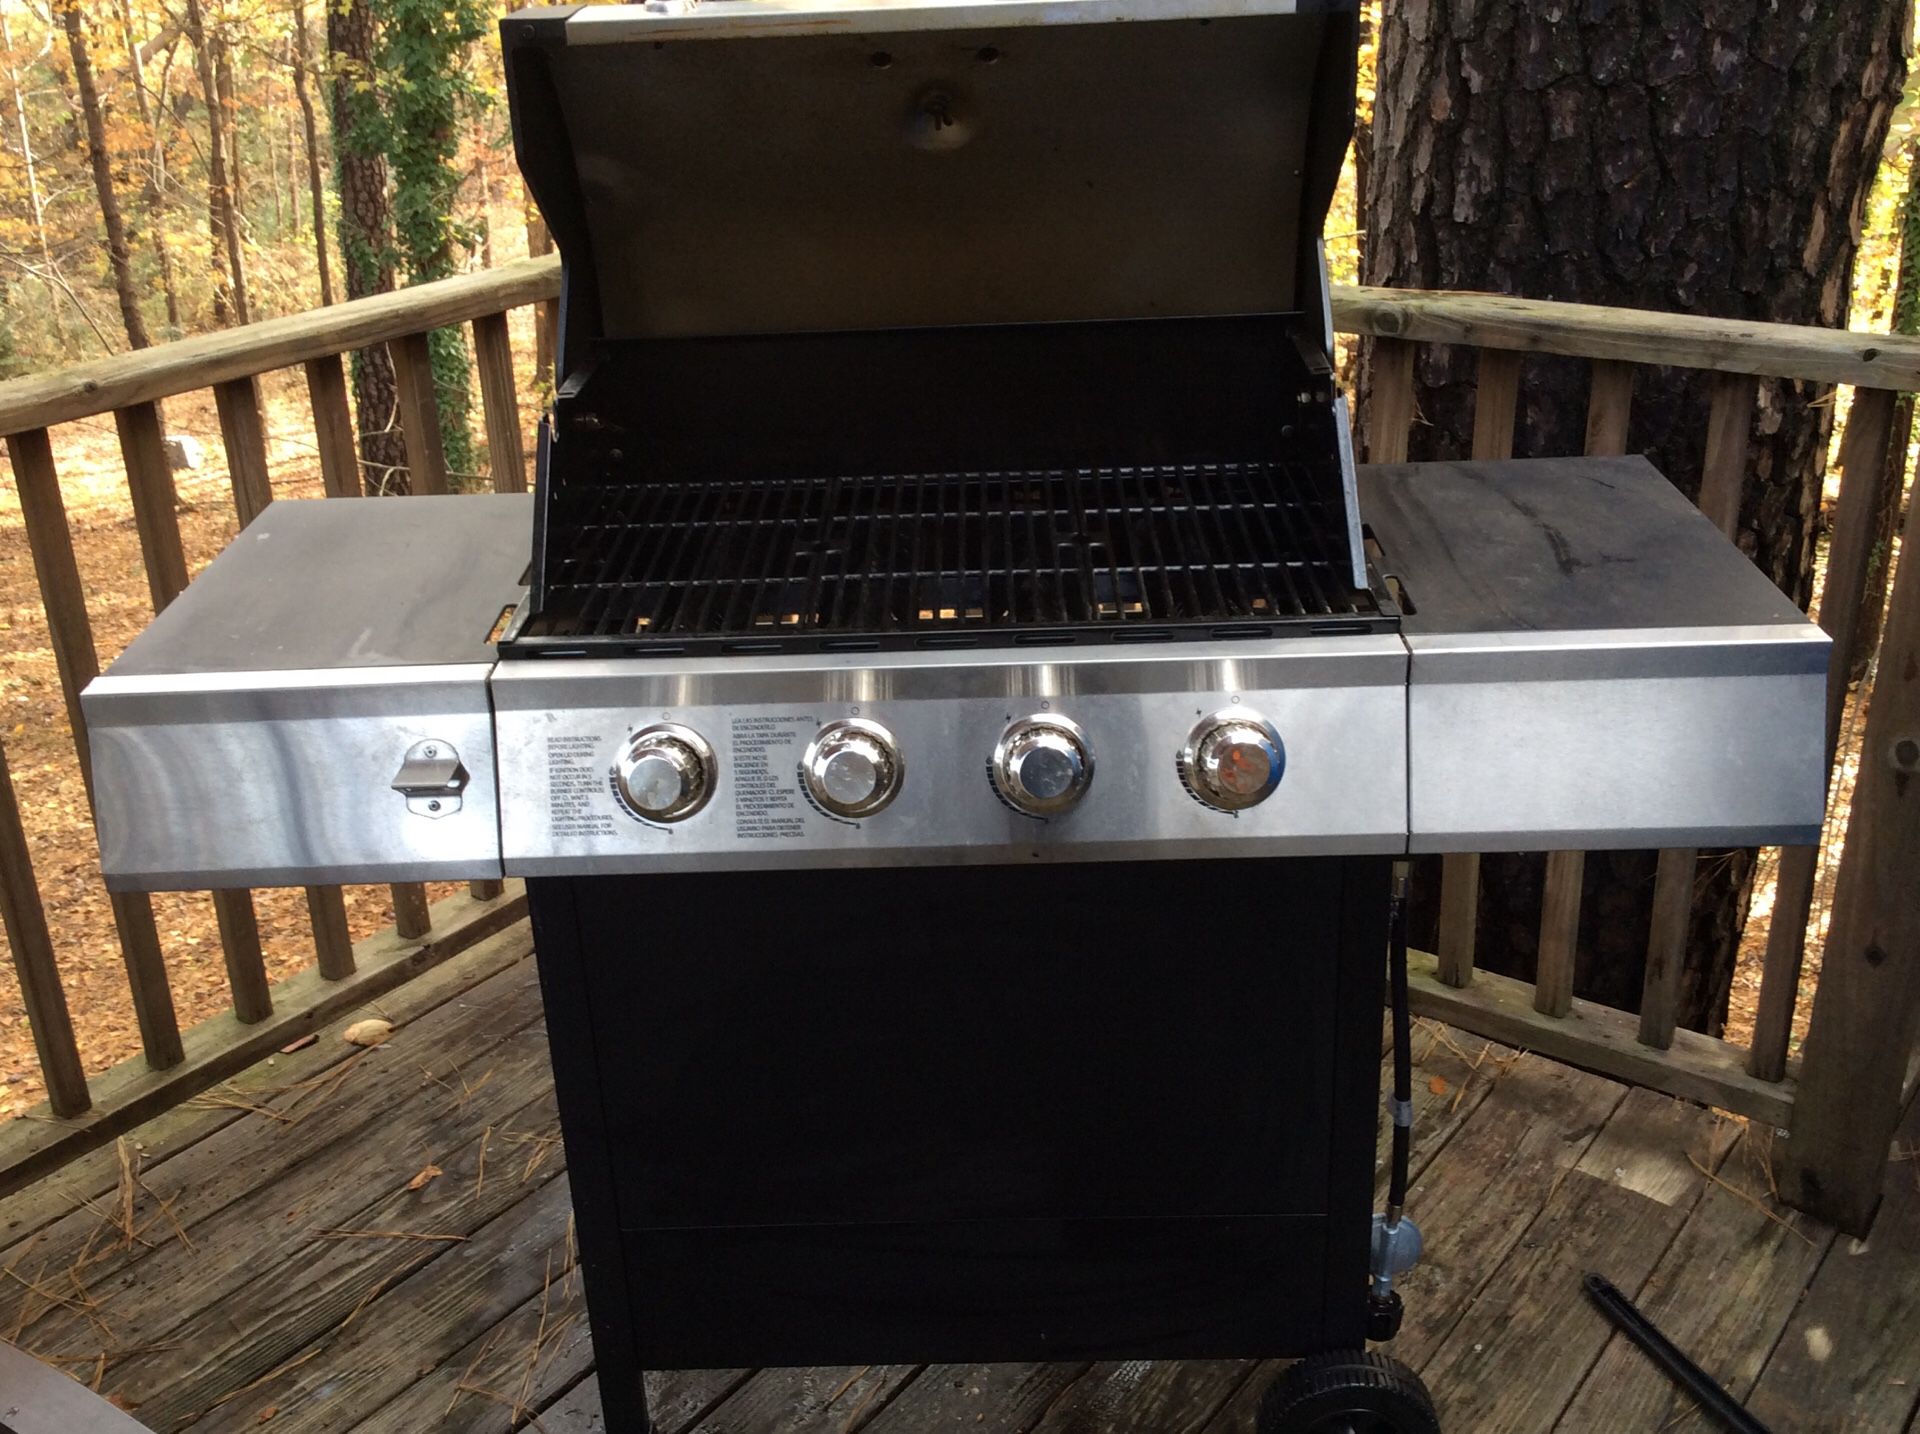 Almost new 4 burner gas grill